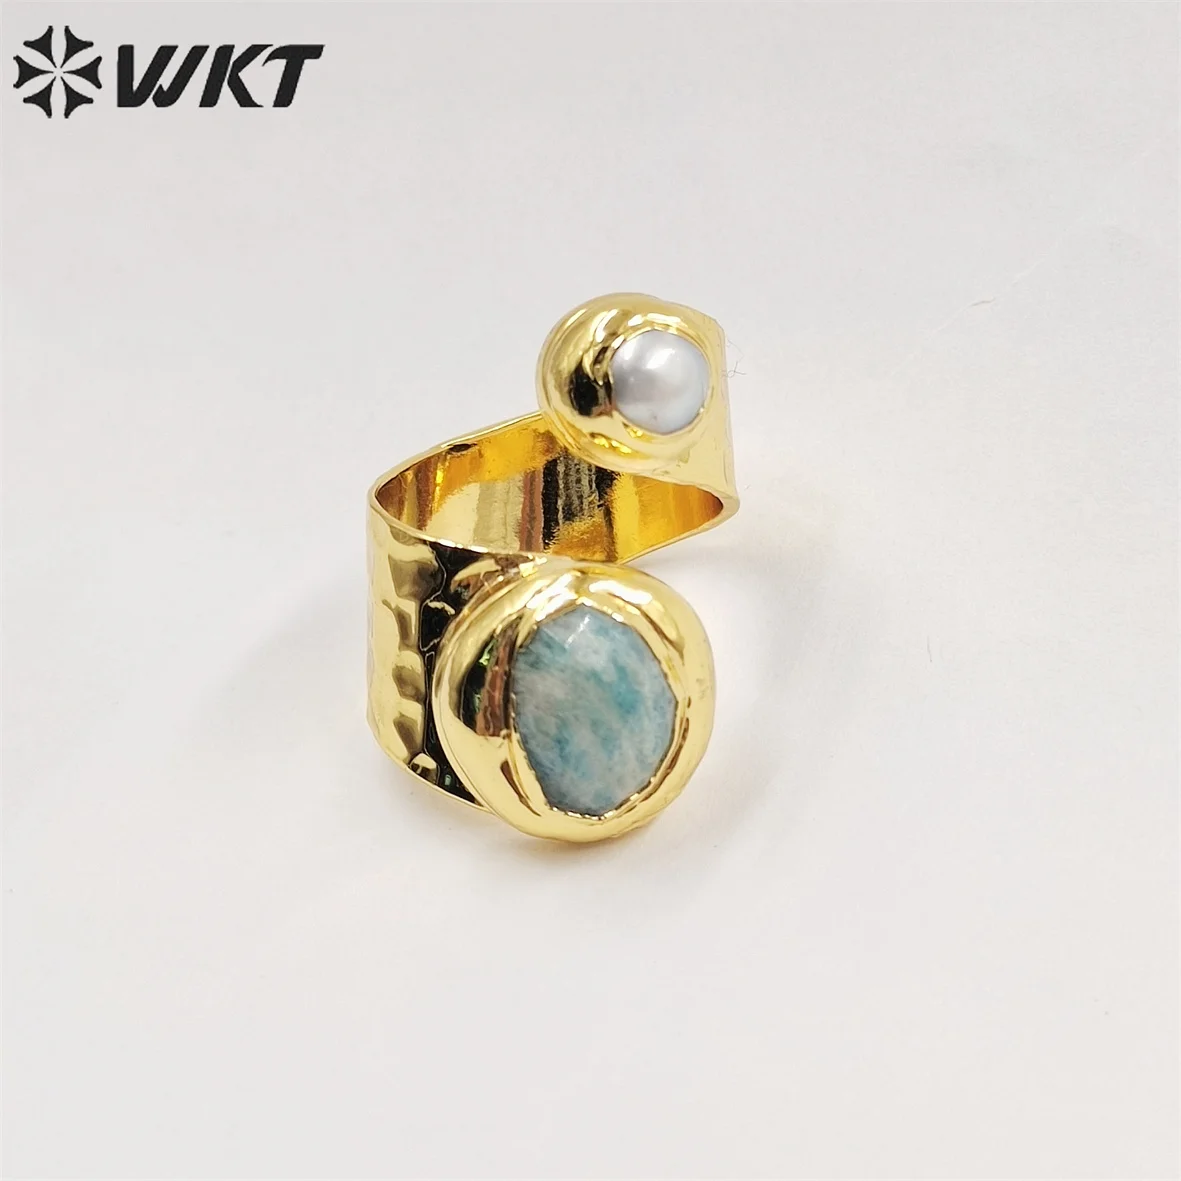 

WT-R438 WKT 2022 New Style Amazonist&Pearl Women Gift Gold-Plate Women Adjustable Ring Fashion Attractive Accessory